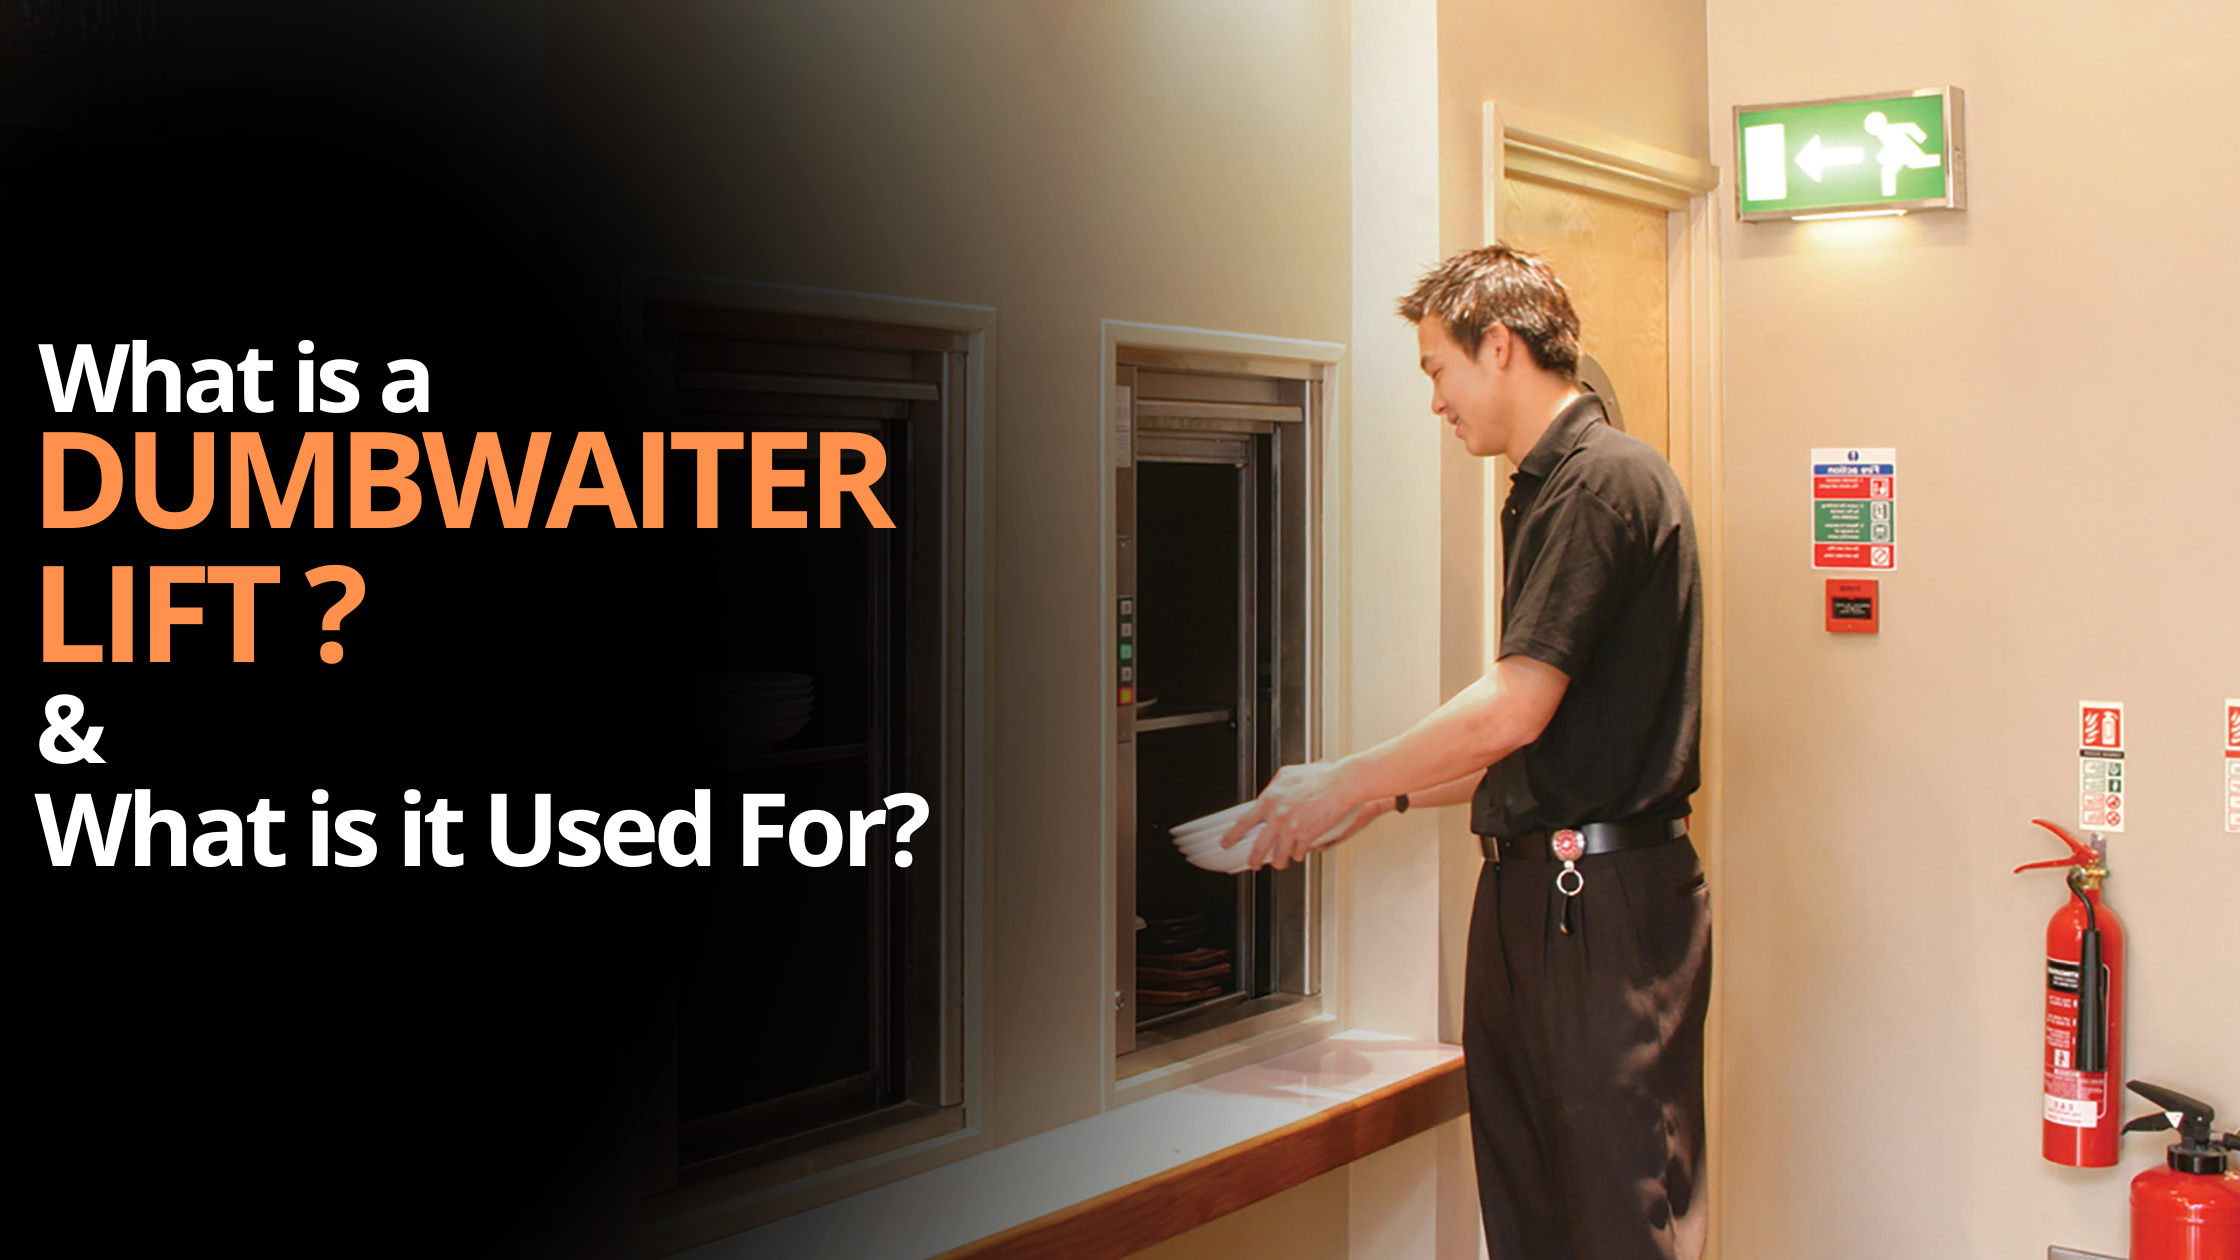 What are dumbwaiter lifts and how do they work?